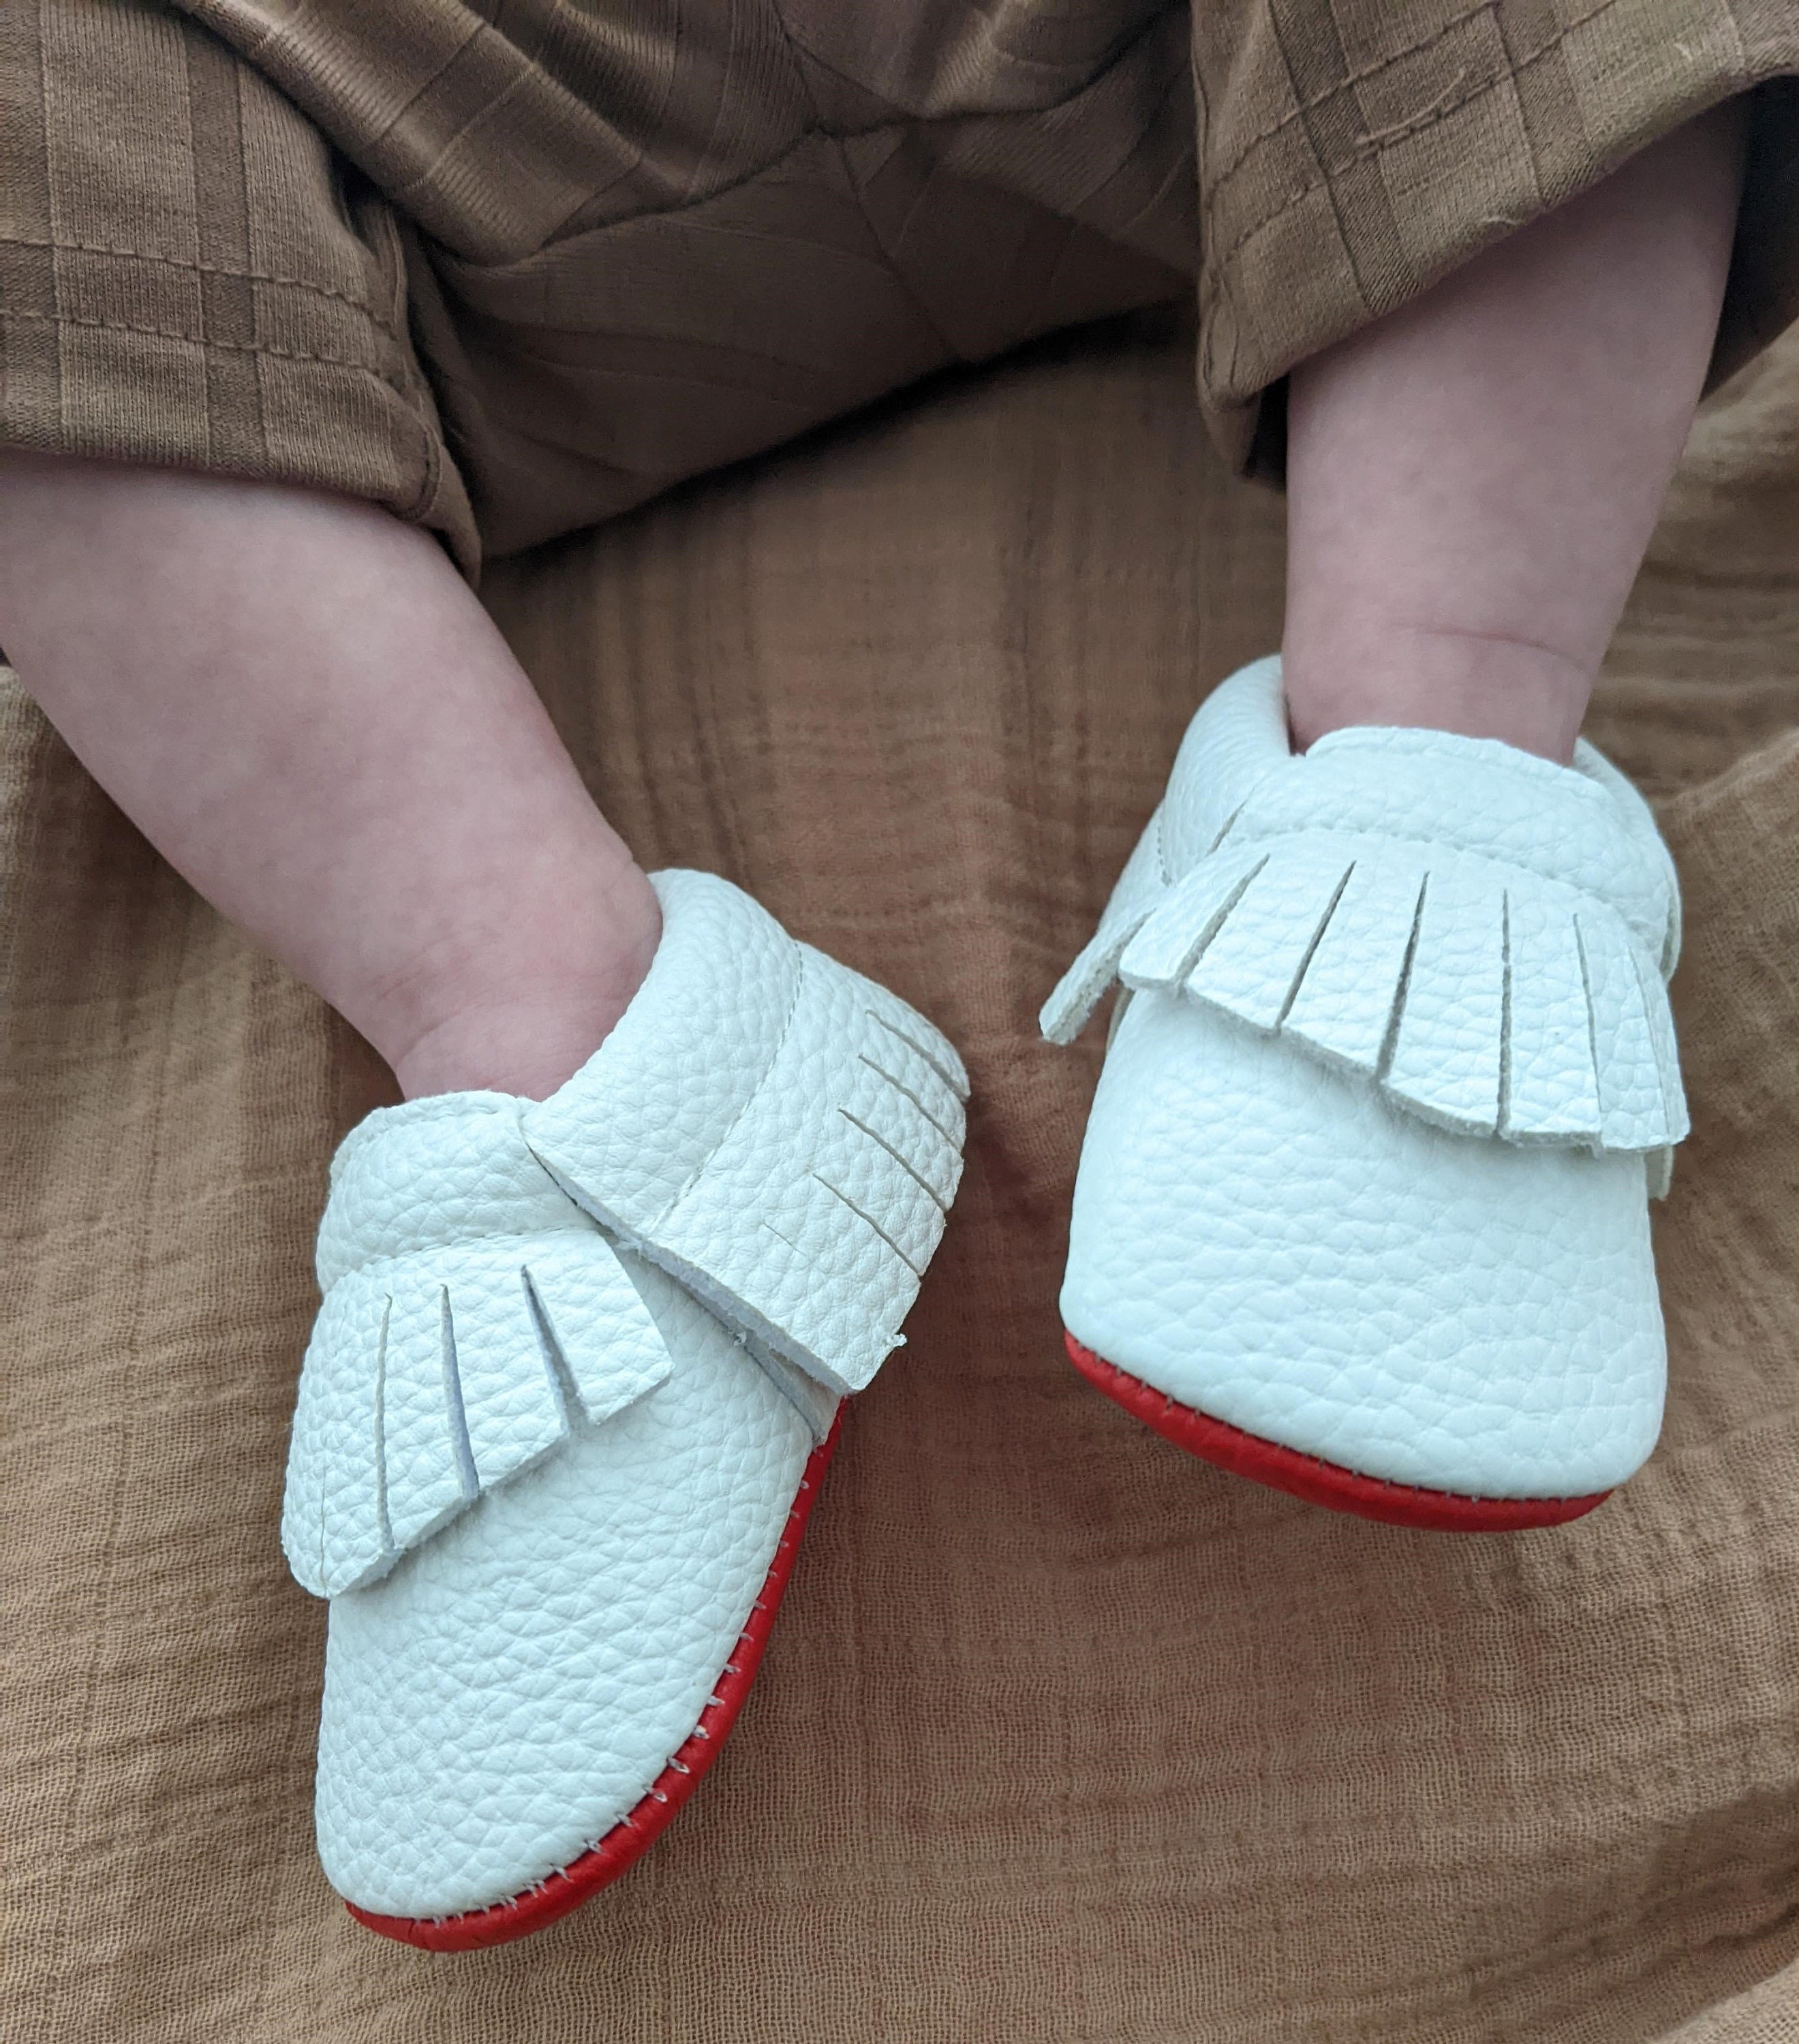 Green and gray leather baby boy boots Schoenen Jongensschoenen Laarzen 18 to 24 months old. Toddler baby shoes Hand sewn booties Personalized baby boy moccasins 